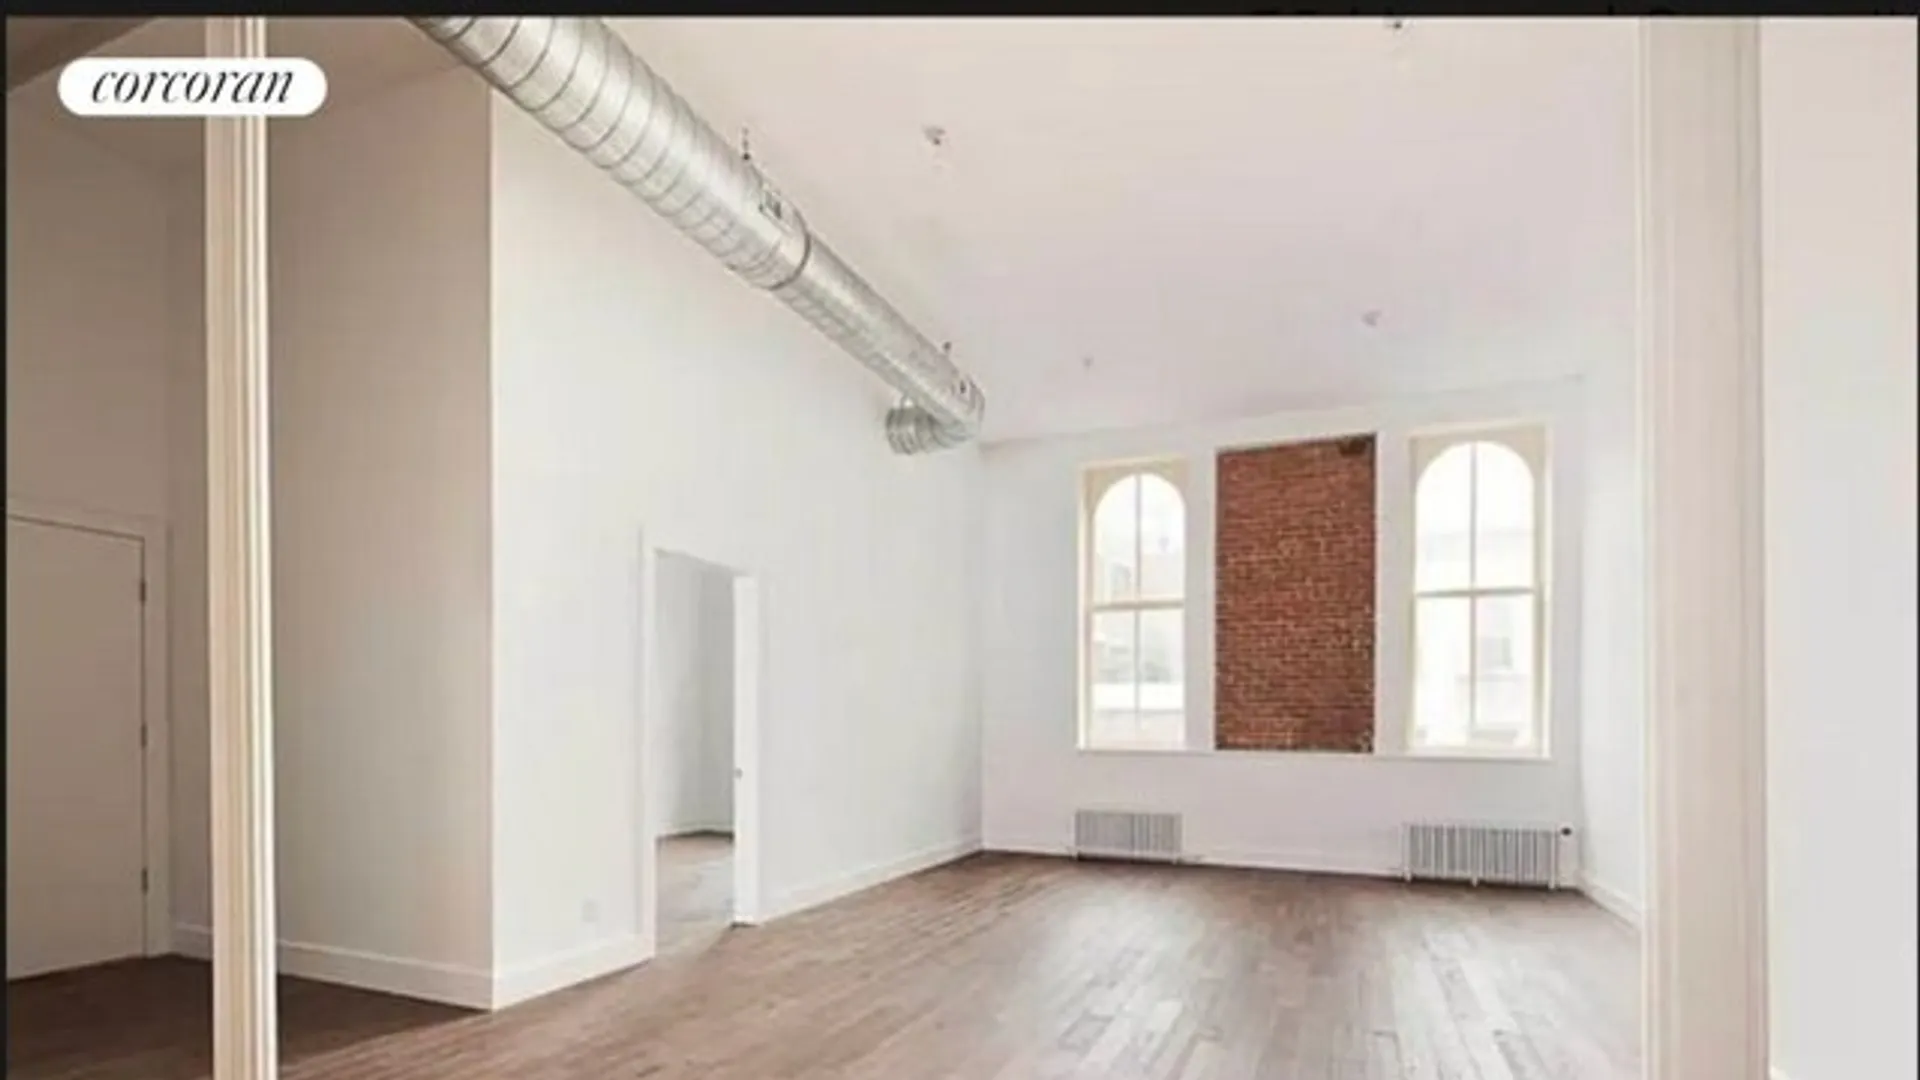 425 Broadway, New York, NY 10013, USA | 1 bed house for rent